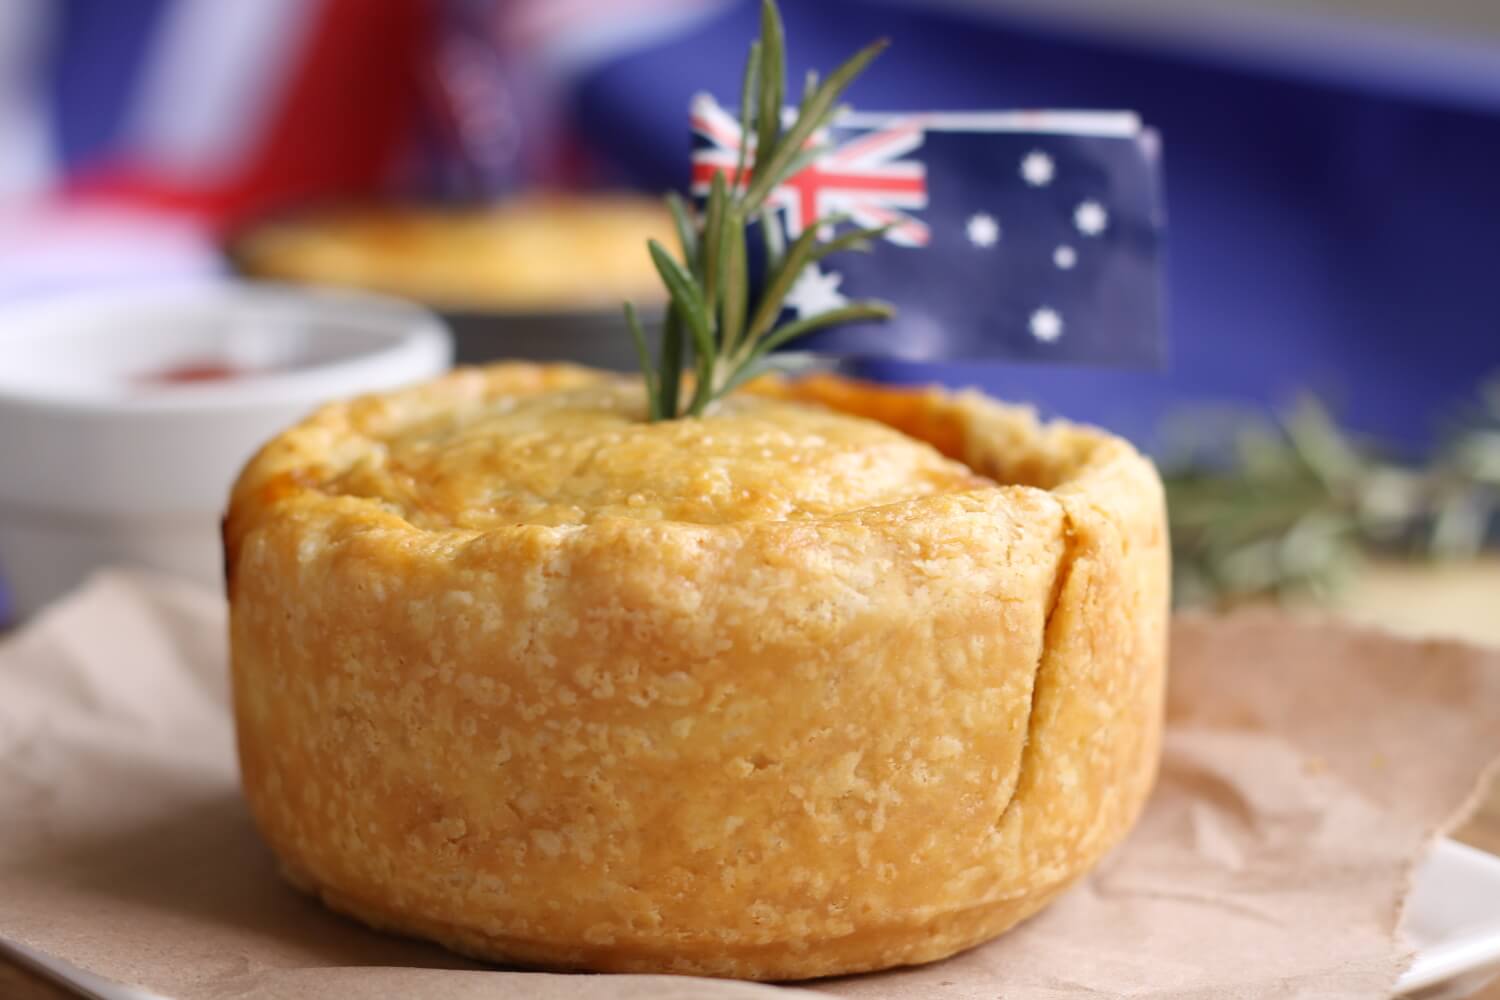 A small pie with a mini Australian flag stuck in.